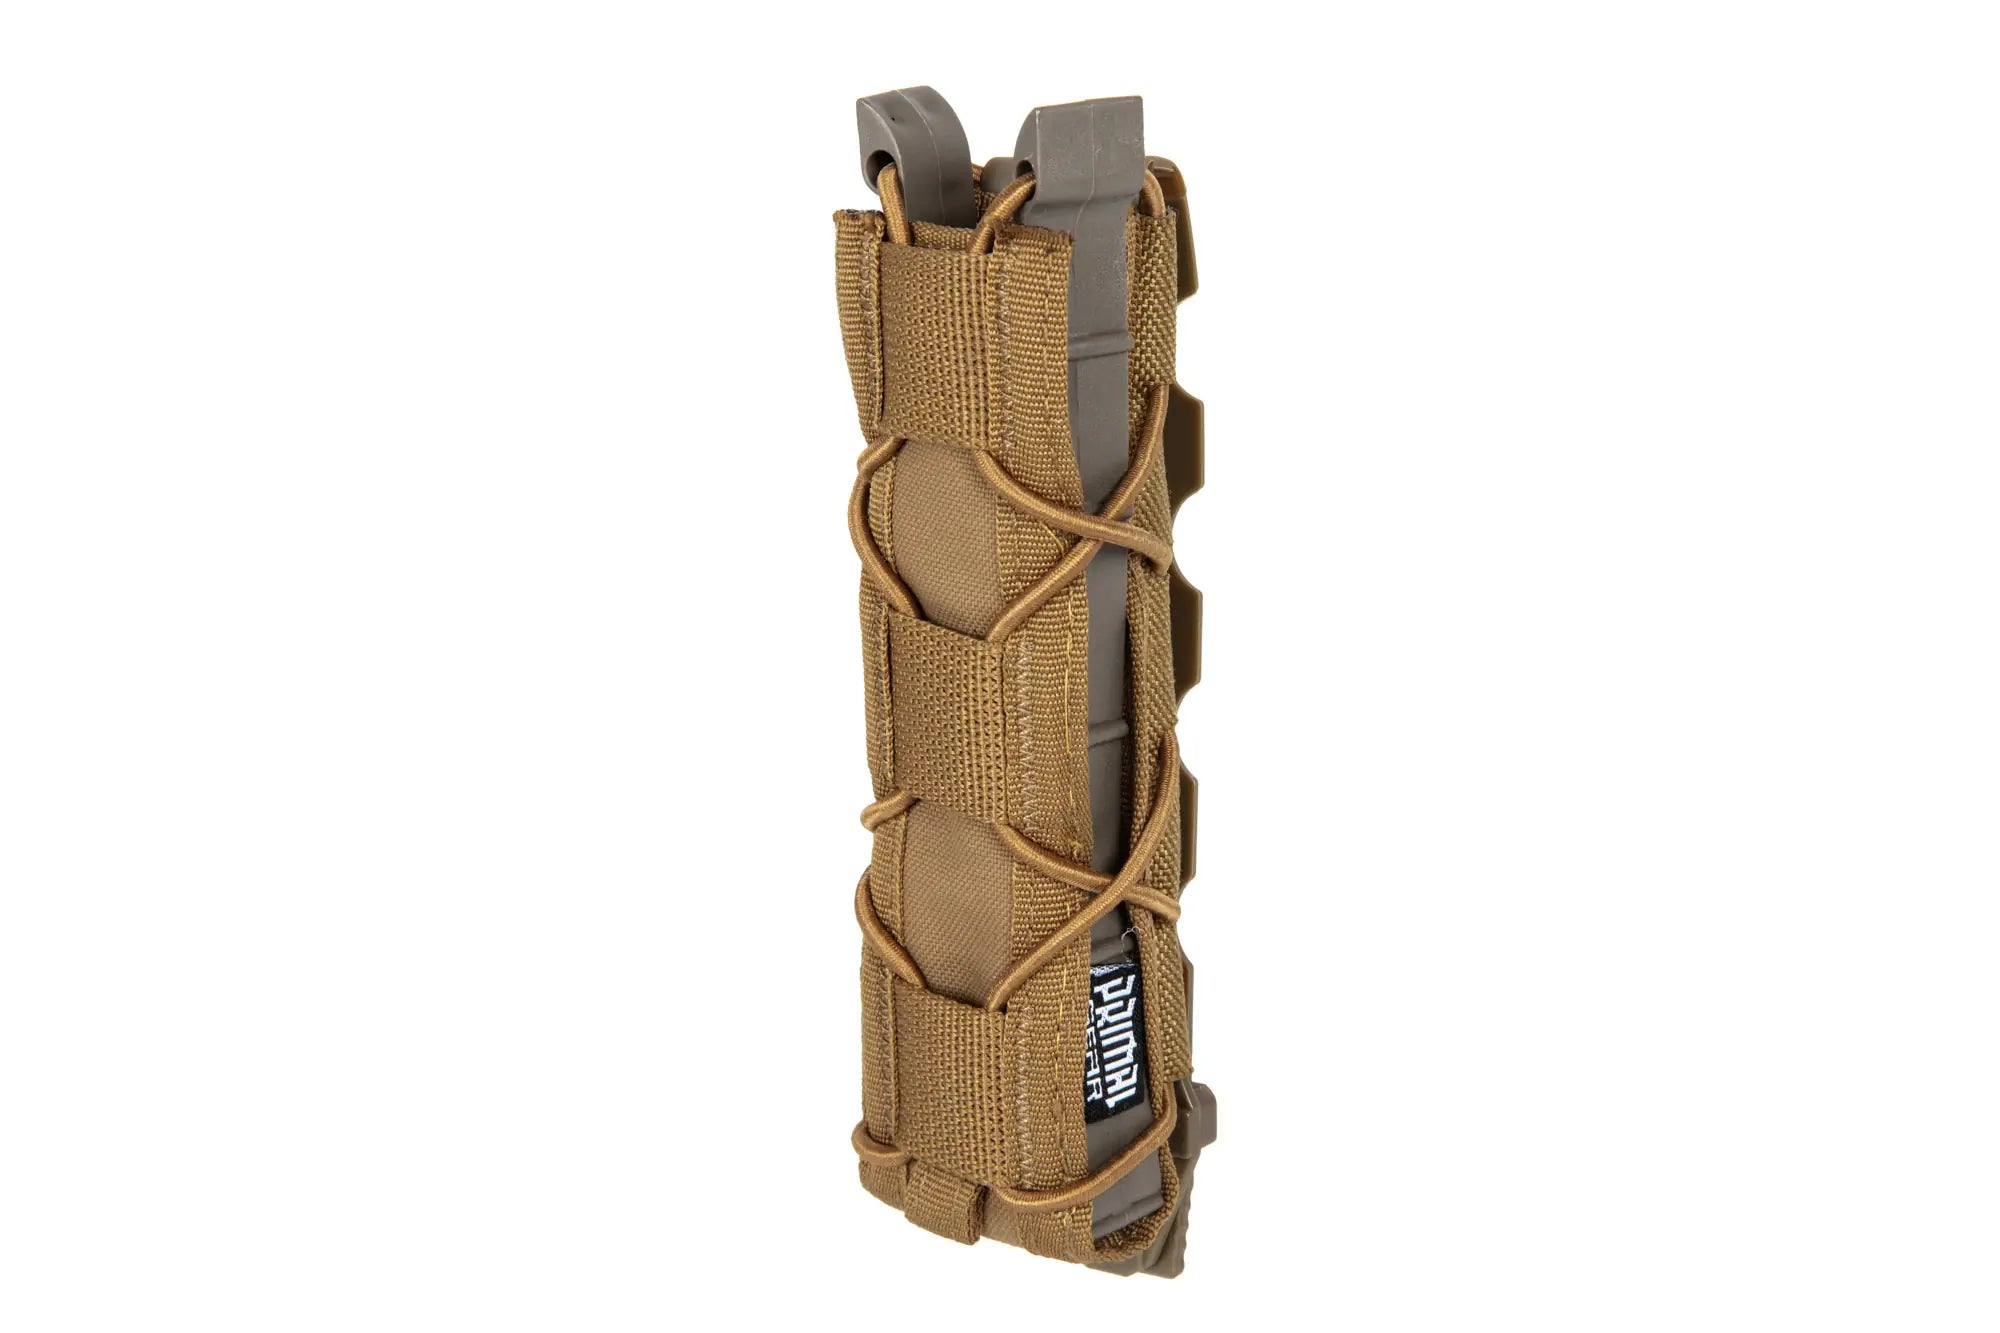 Tiger Type Long Magazine Pouch CB